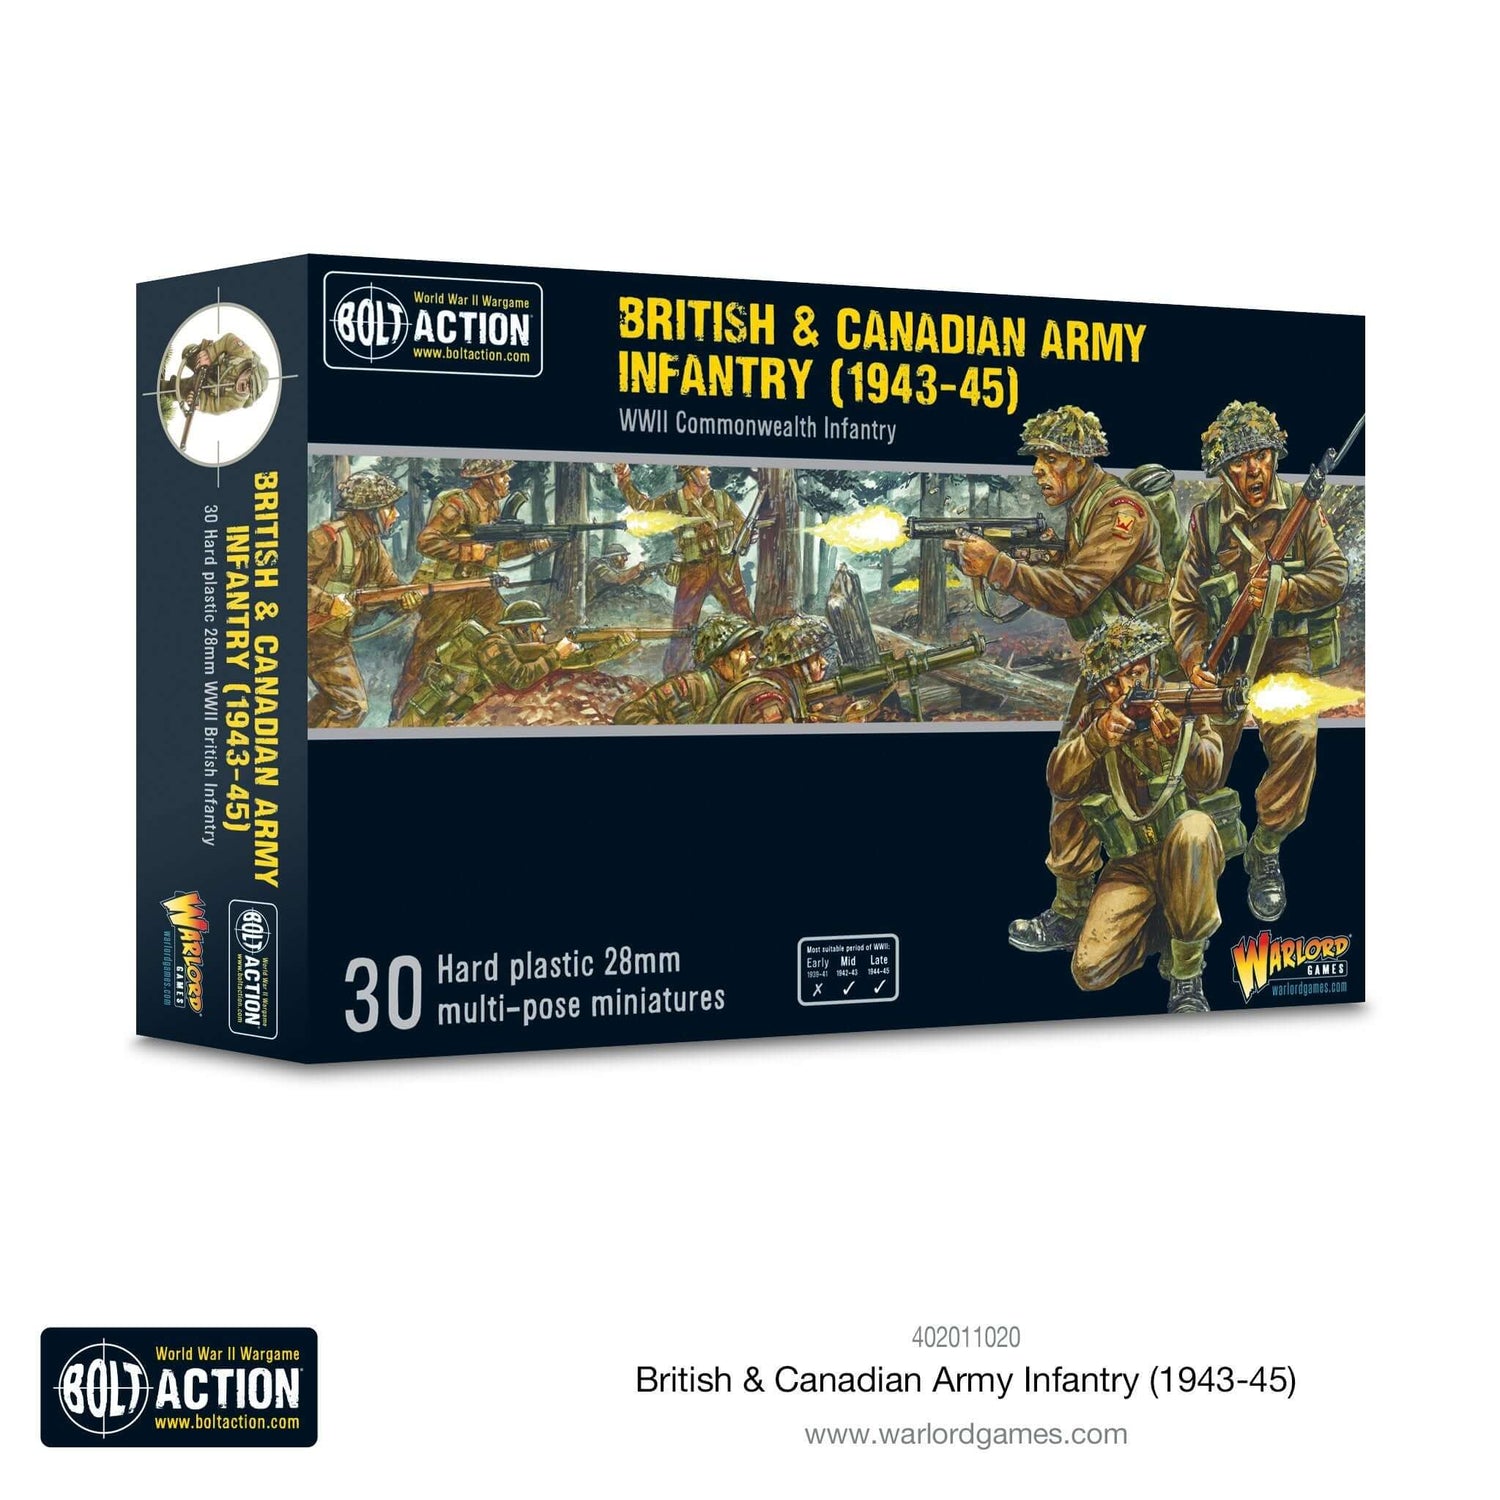 British & Canadian Army infantry (1943-45) Bolt Action WARLORD